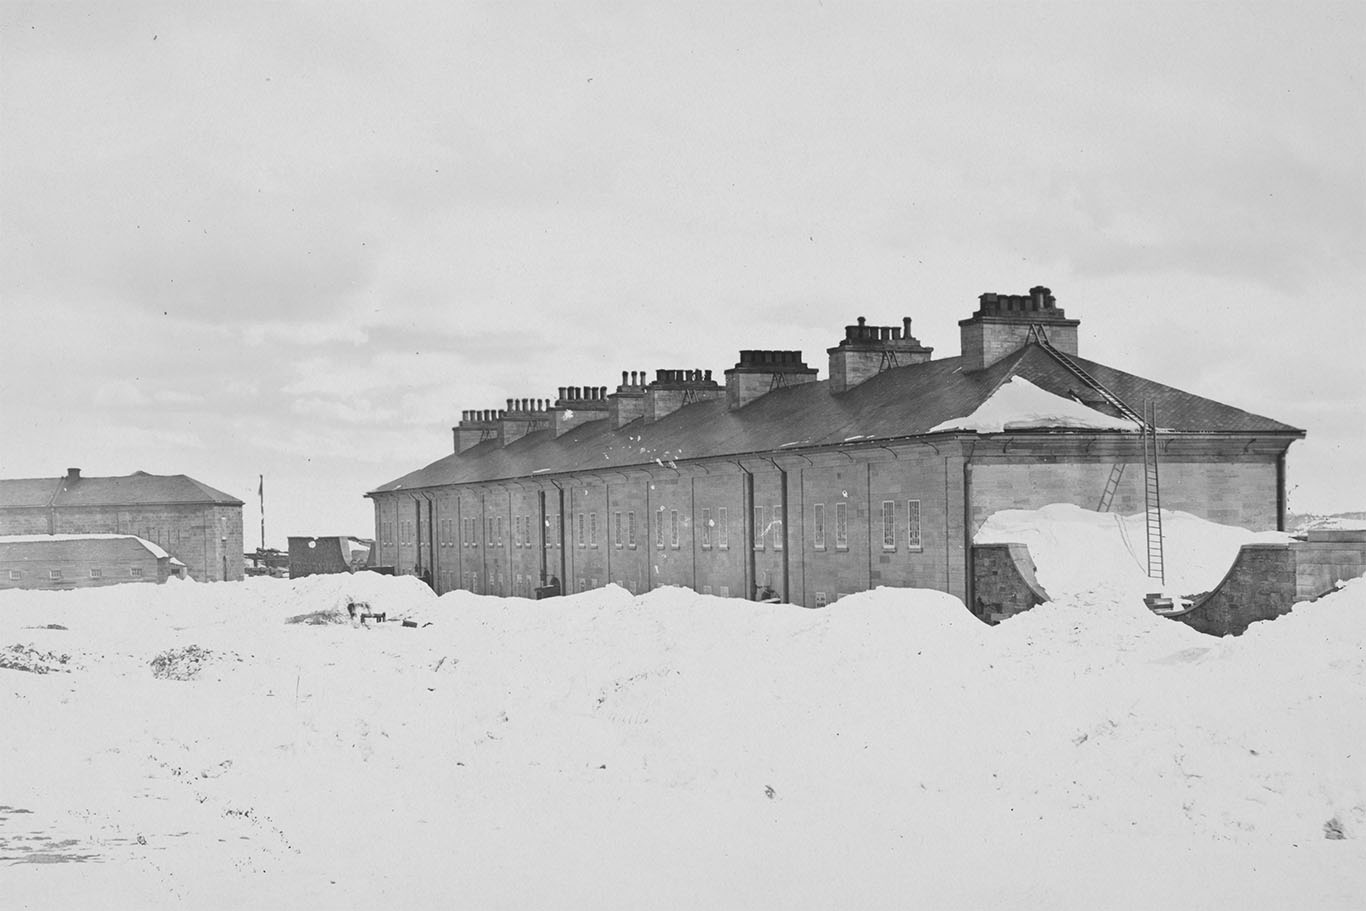 Officer’s Barracks, Residence of the Governor General and the Prison, Citadelle of Québec in winter, circa 1875